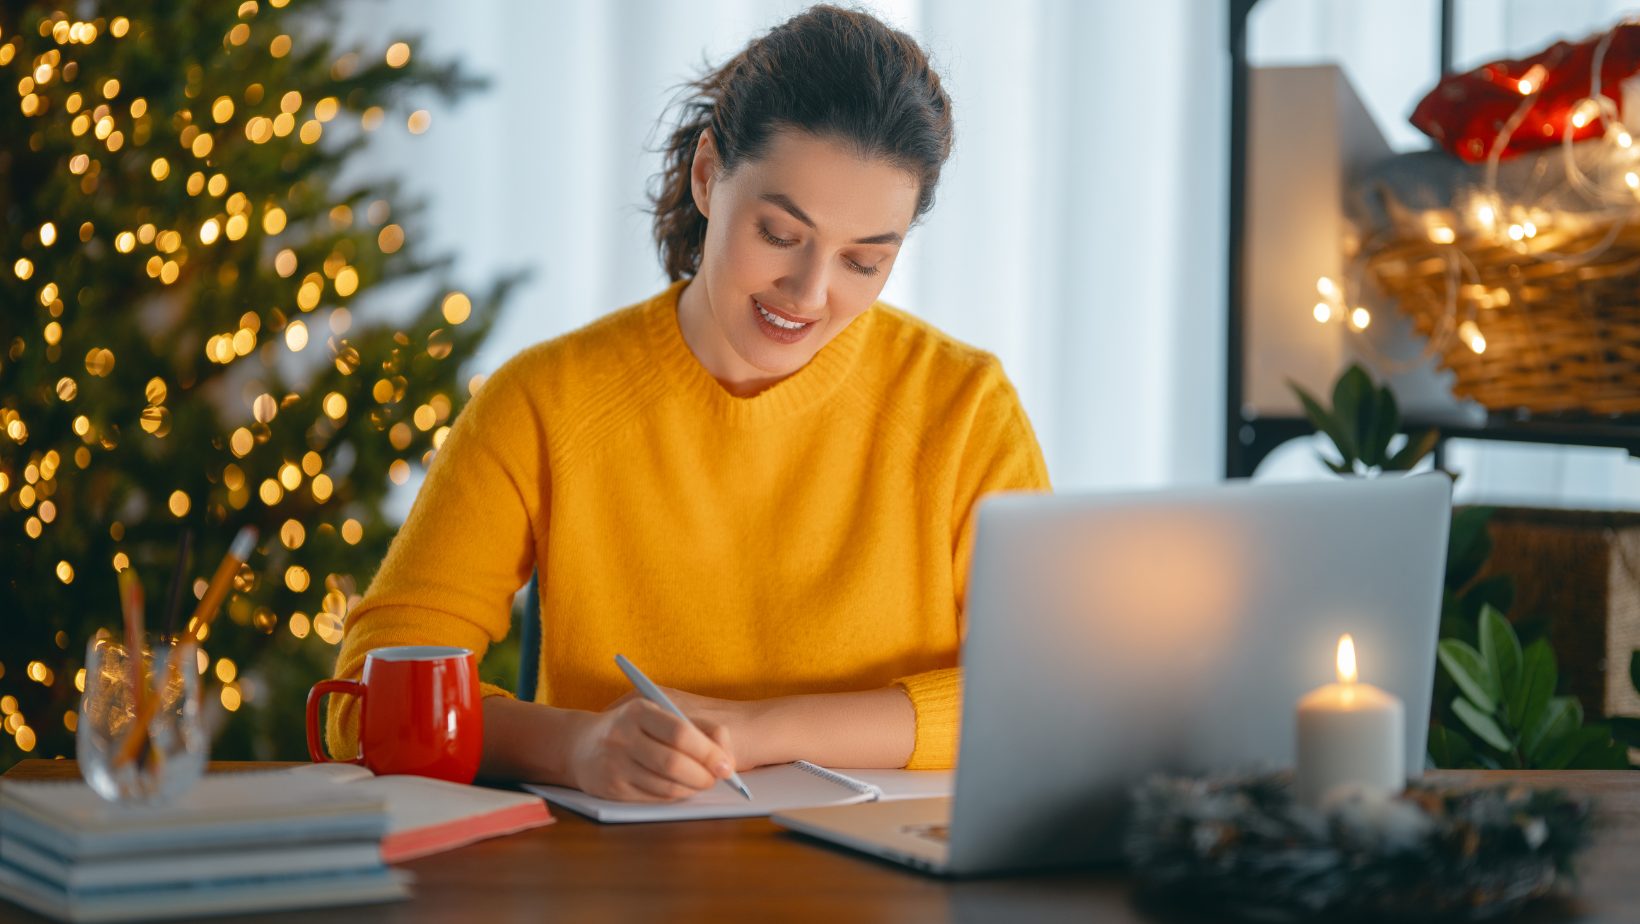 5 Creative and Cost-Effective Holiday Marketing Ideas for Small Businesses